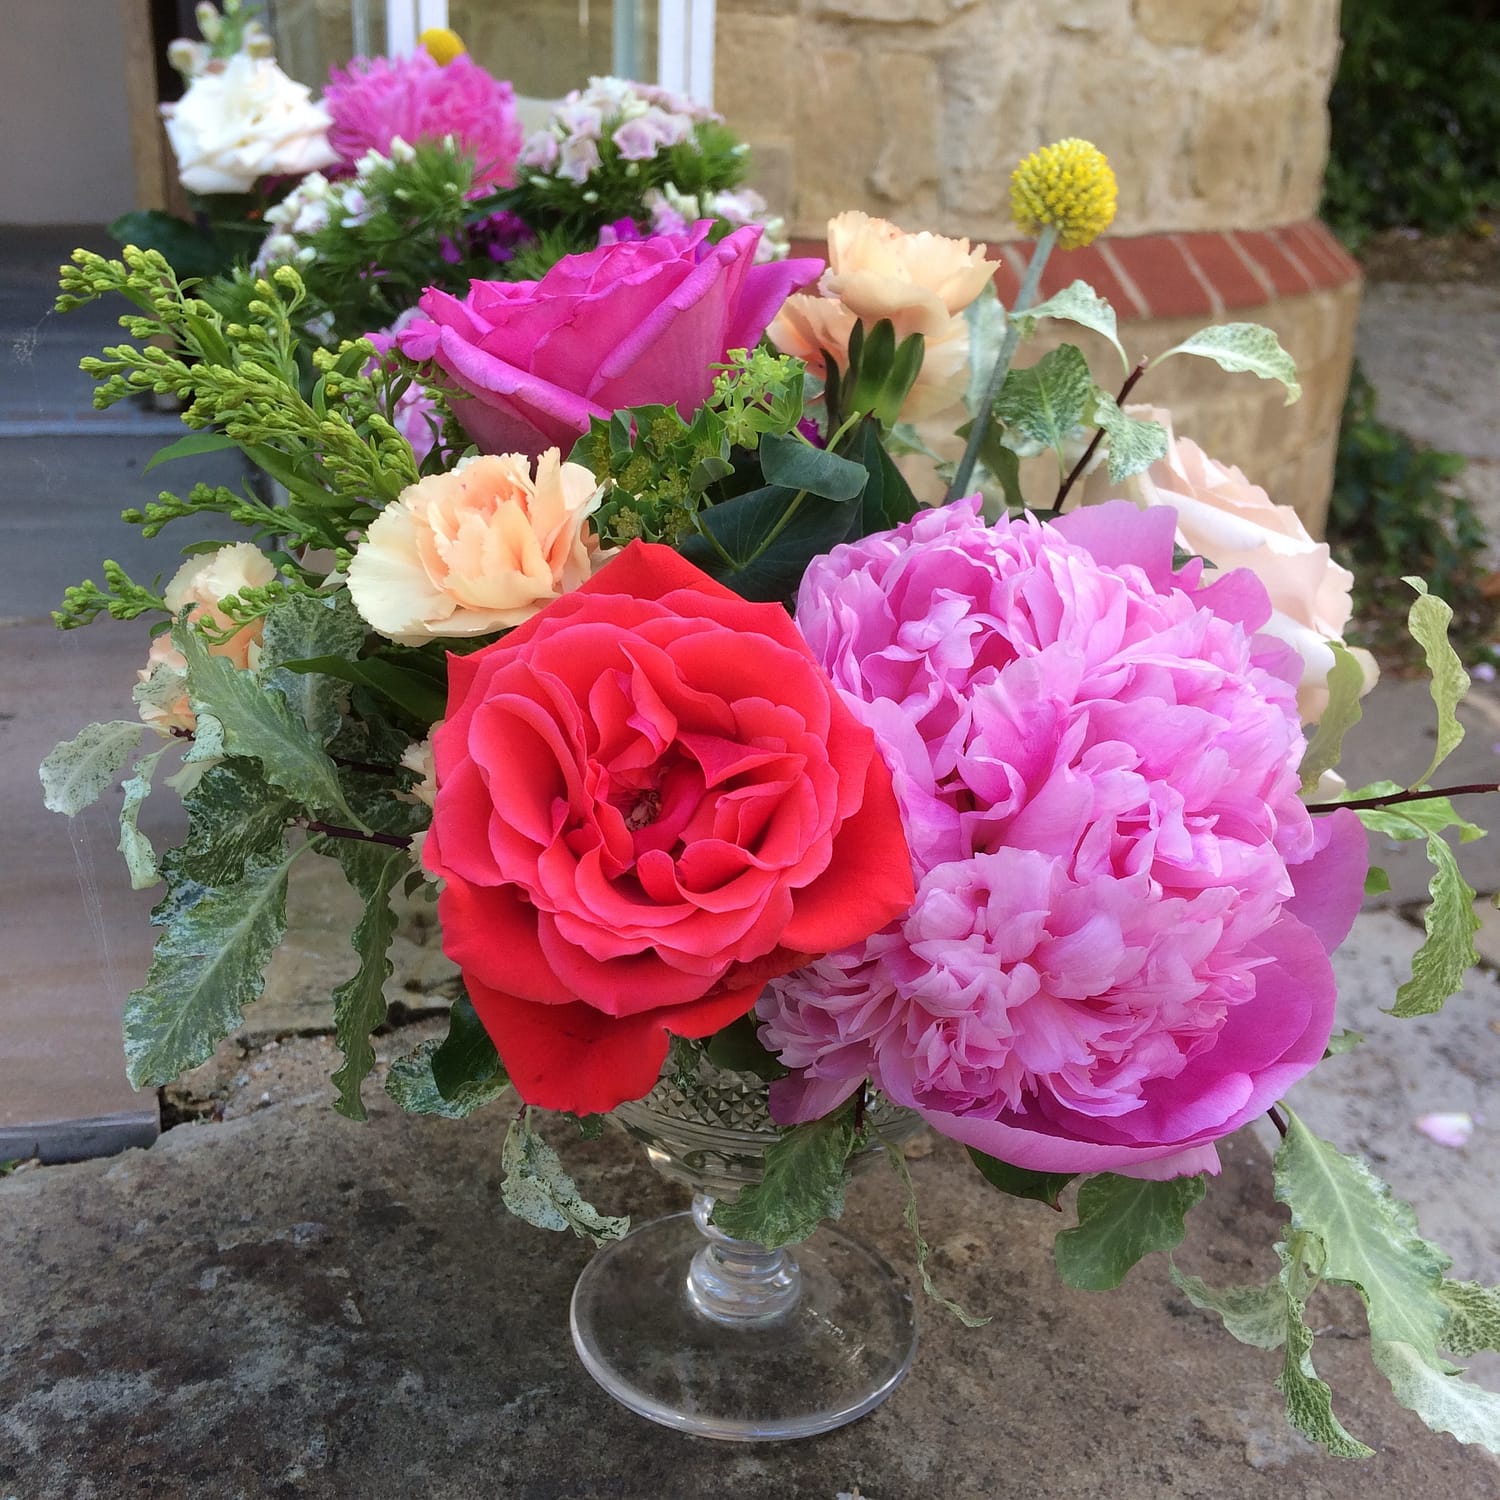 june flowers peonies and english roses